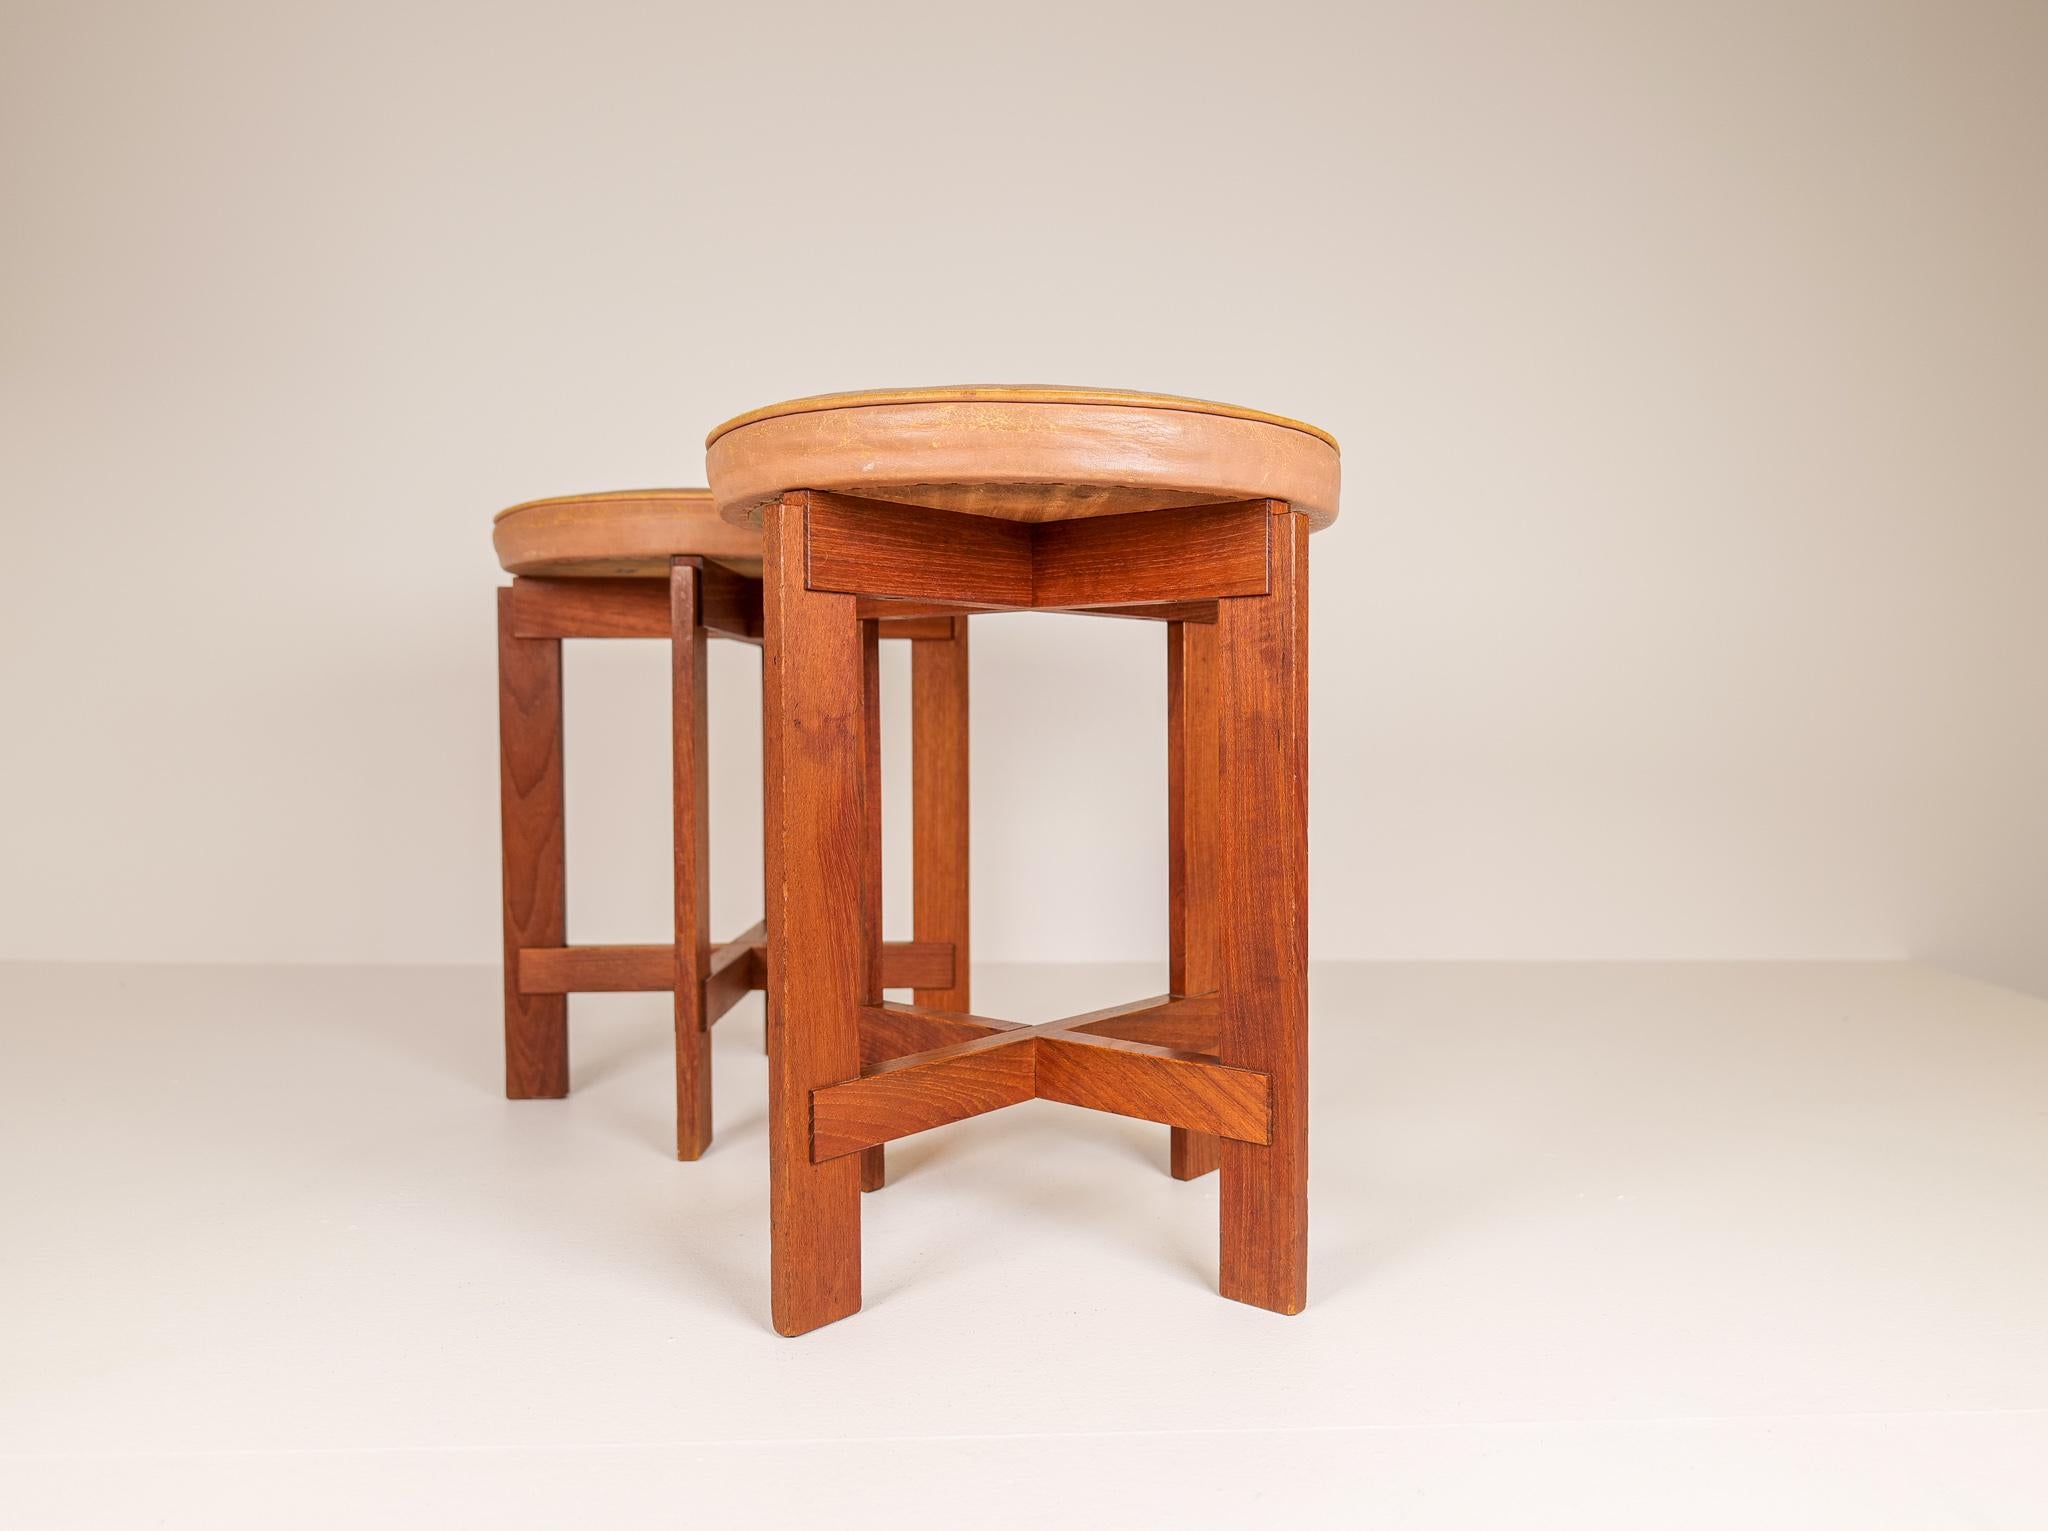 Midcentury Teak and Leather Stools Uno & Östen Kristiansson for Luxus, Sweden In Good Condition For Sale In Hillringsberg, SE